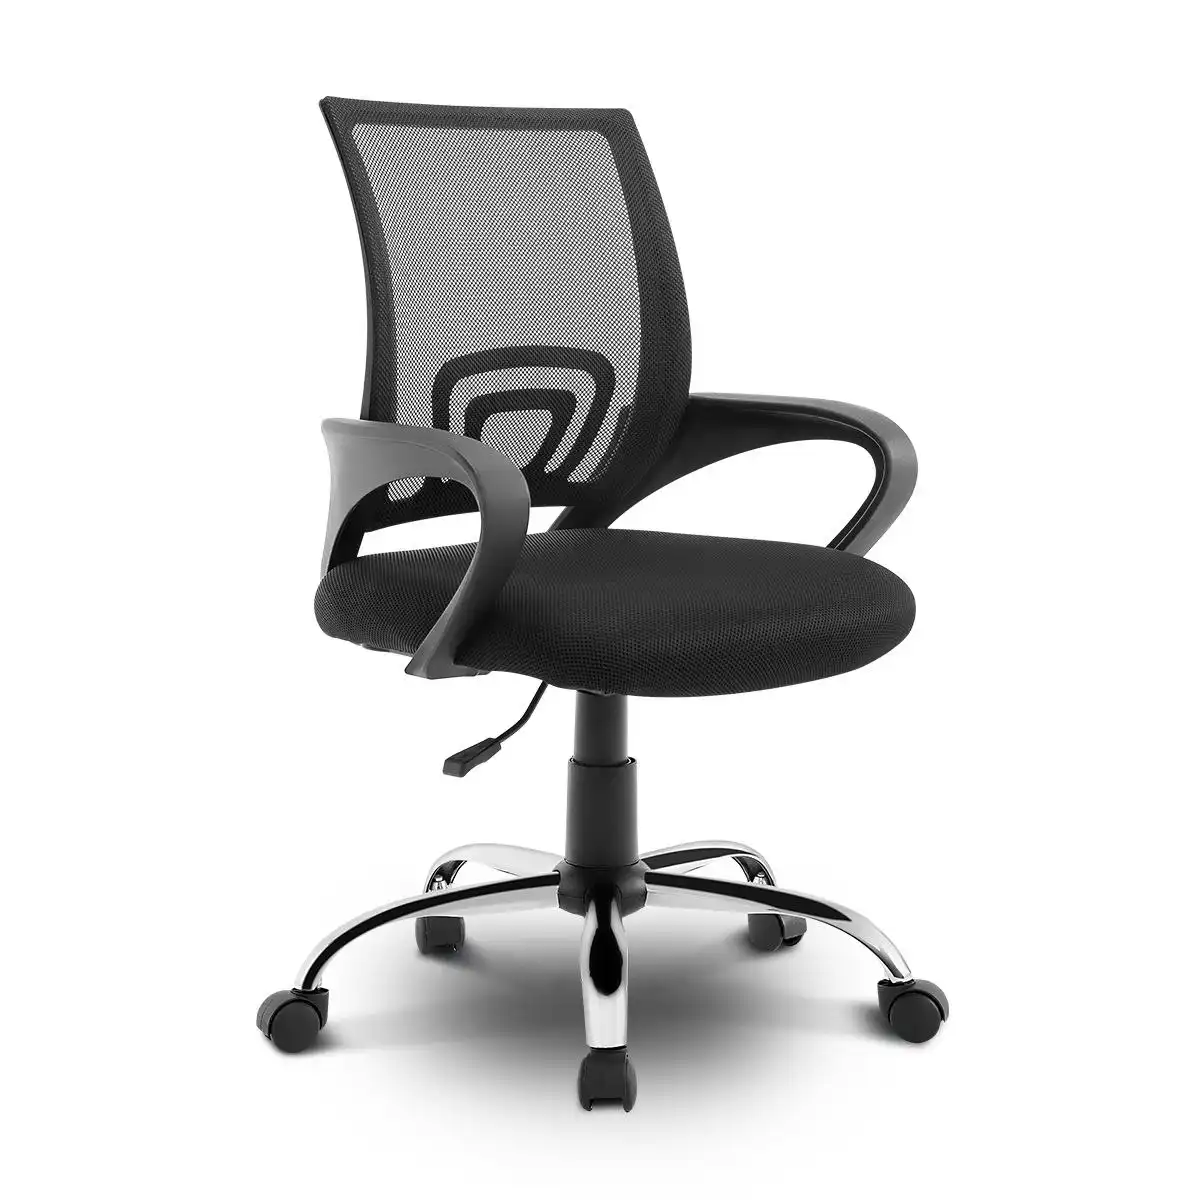 Ausway Ergonomic Mesh Office Chair for Home